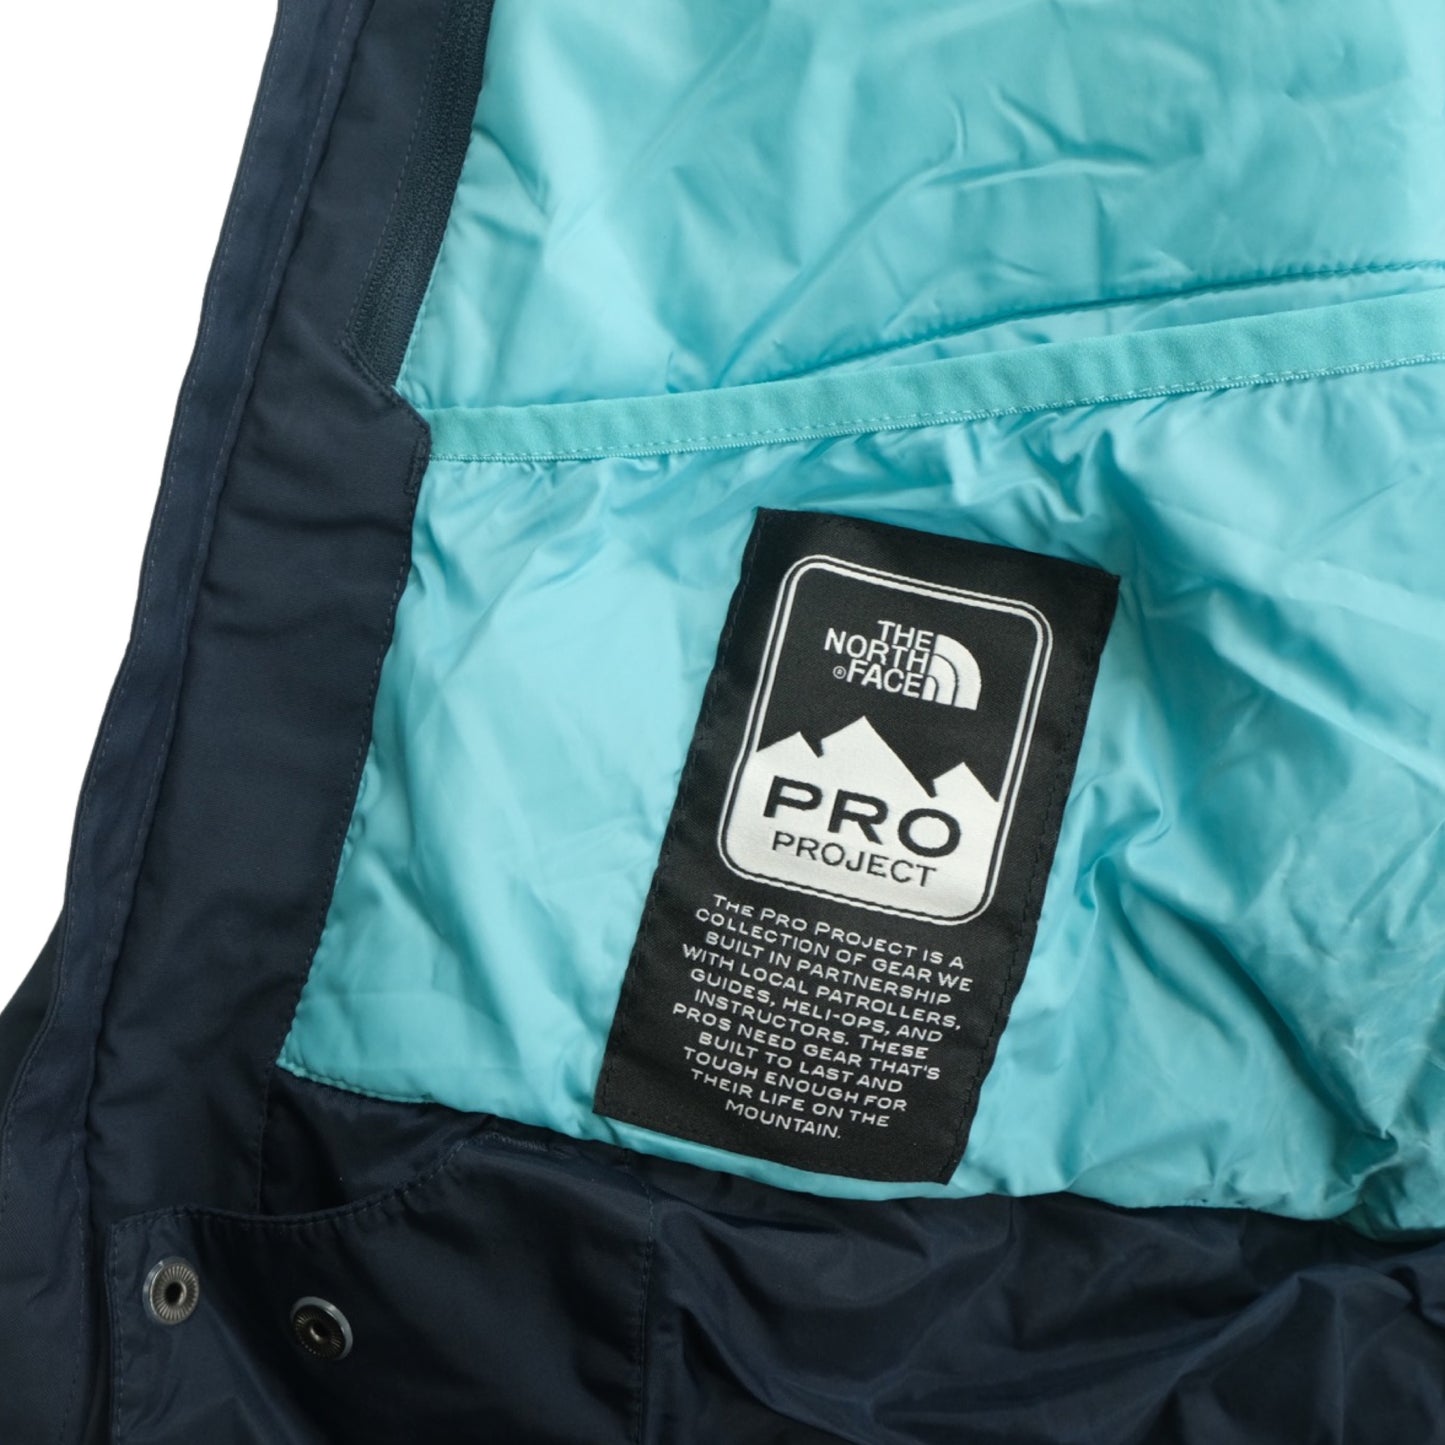 The North Face Lostrail Jacket